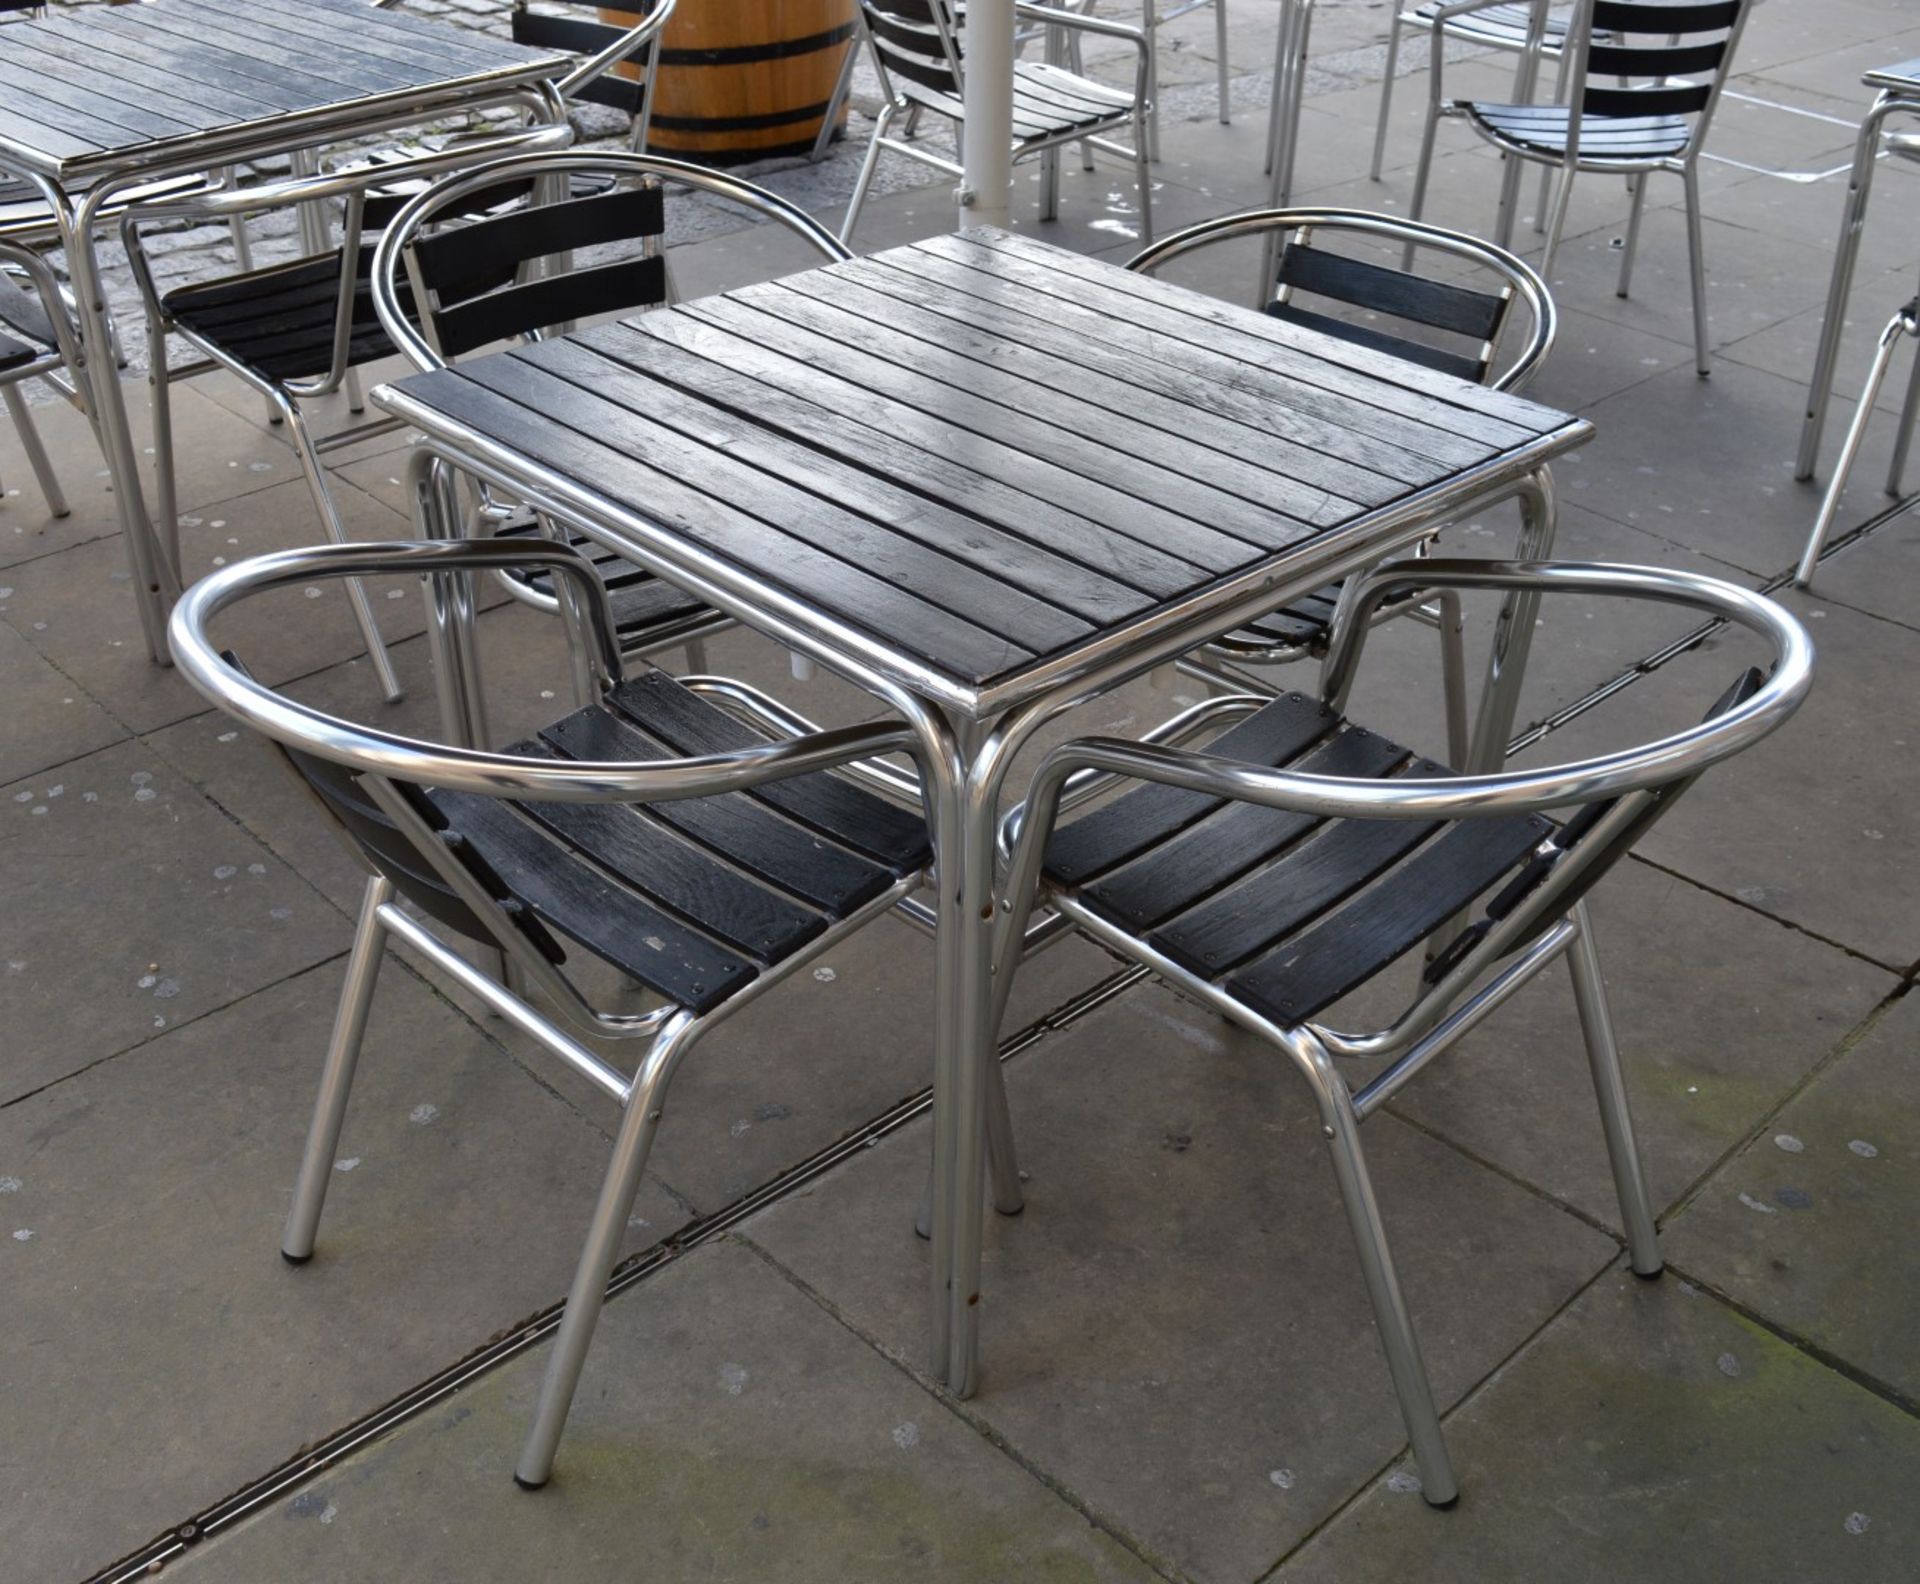 20 x Aluminium Outdoor Garden Chairs With Armrests, Wooden Slatted Seats and Back Rests - - Image 2 of 3